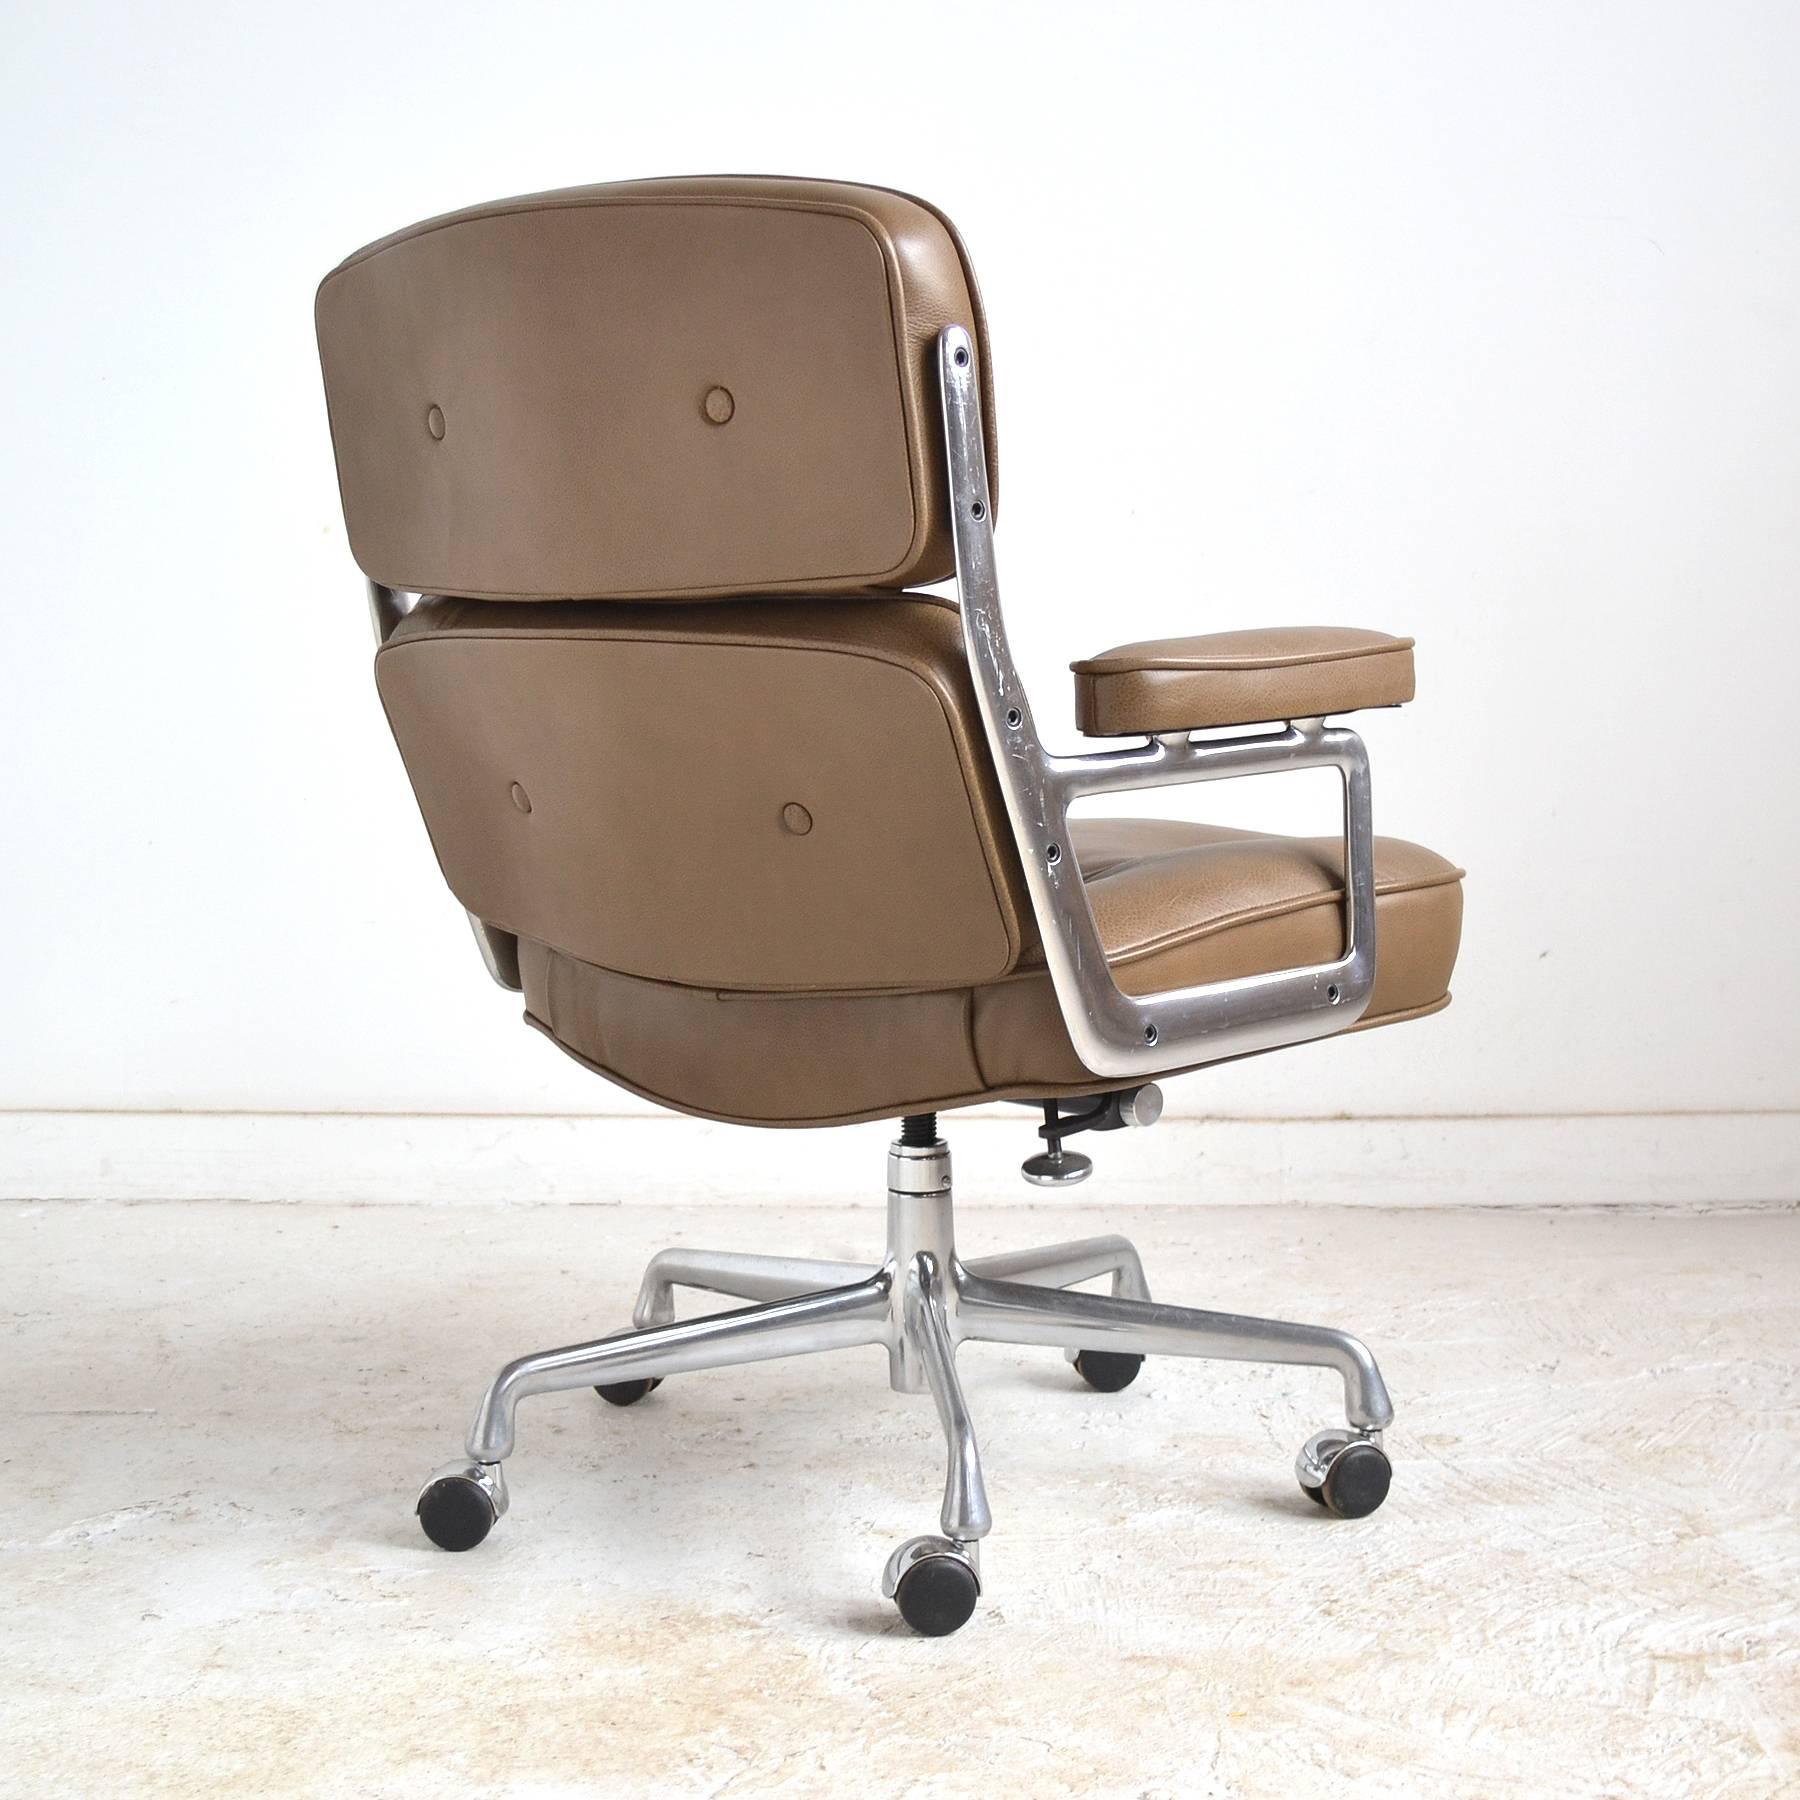 Charles and Ray Eames Pair of Time-Life Chairs by Herman Miller 1